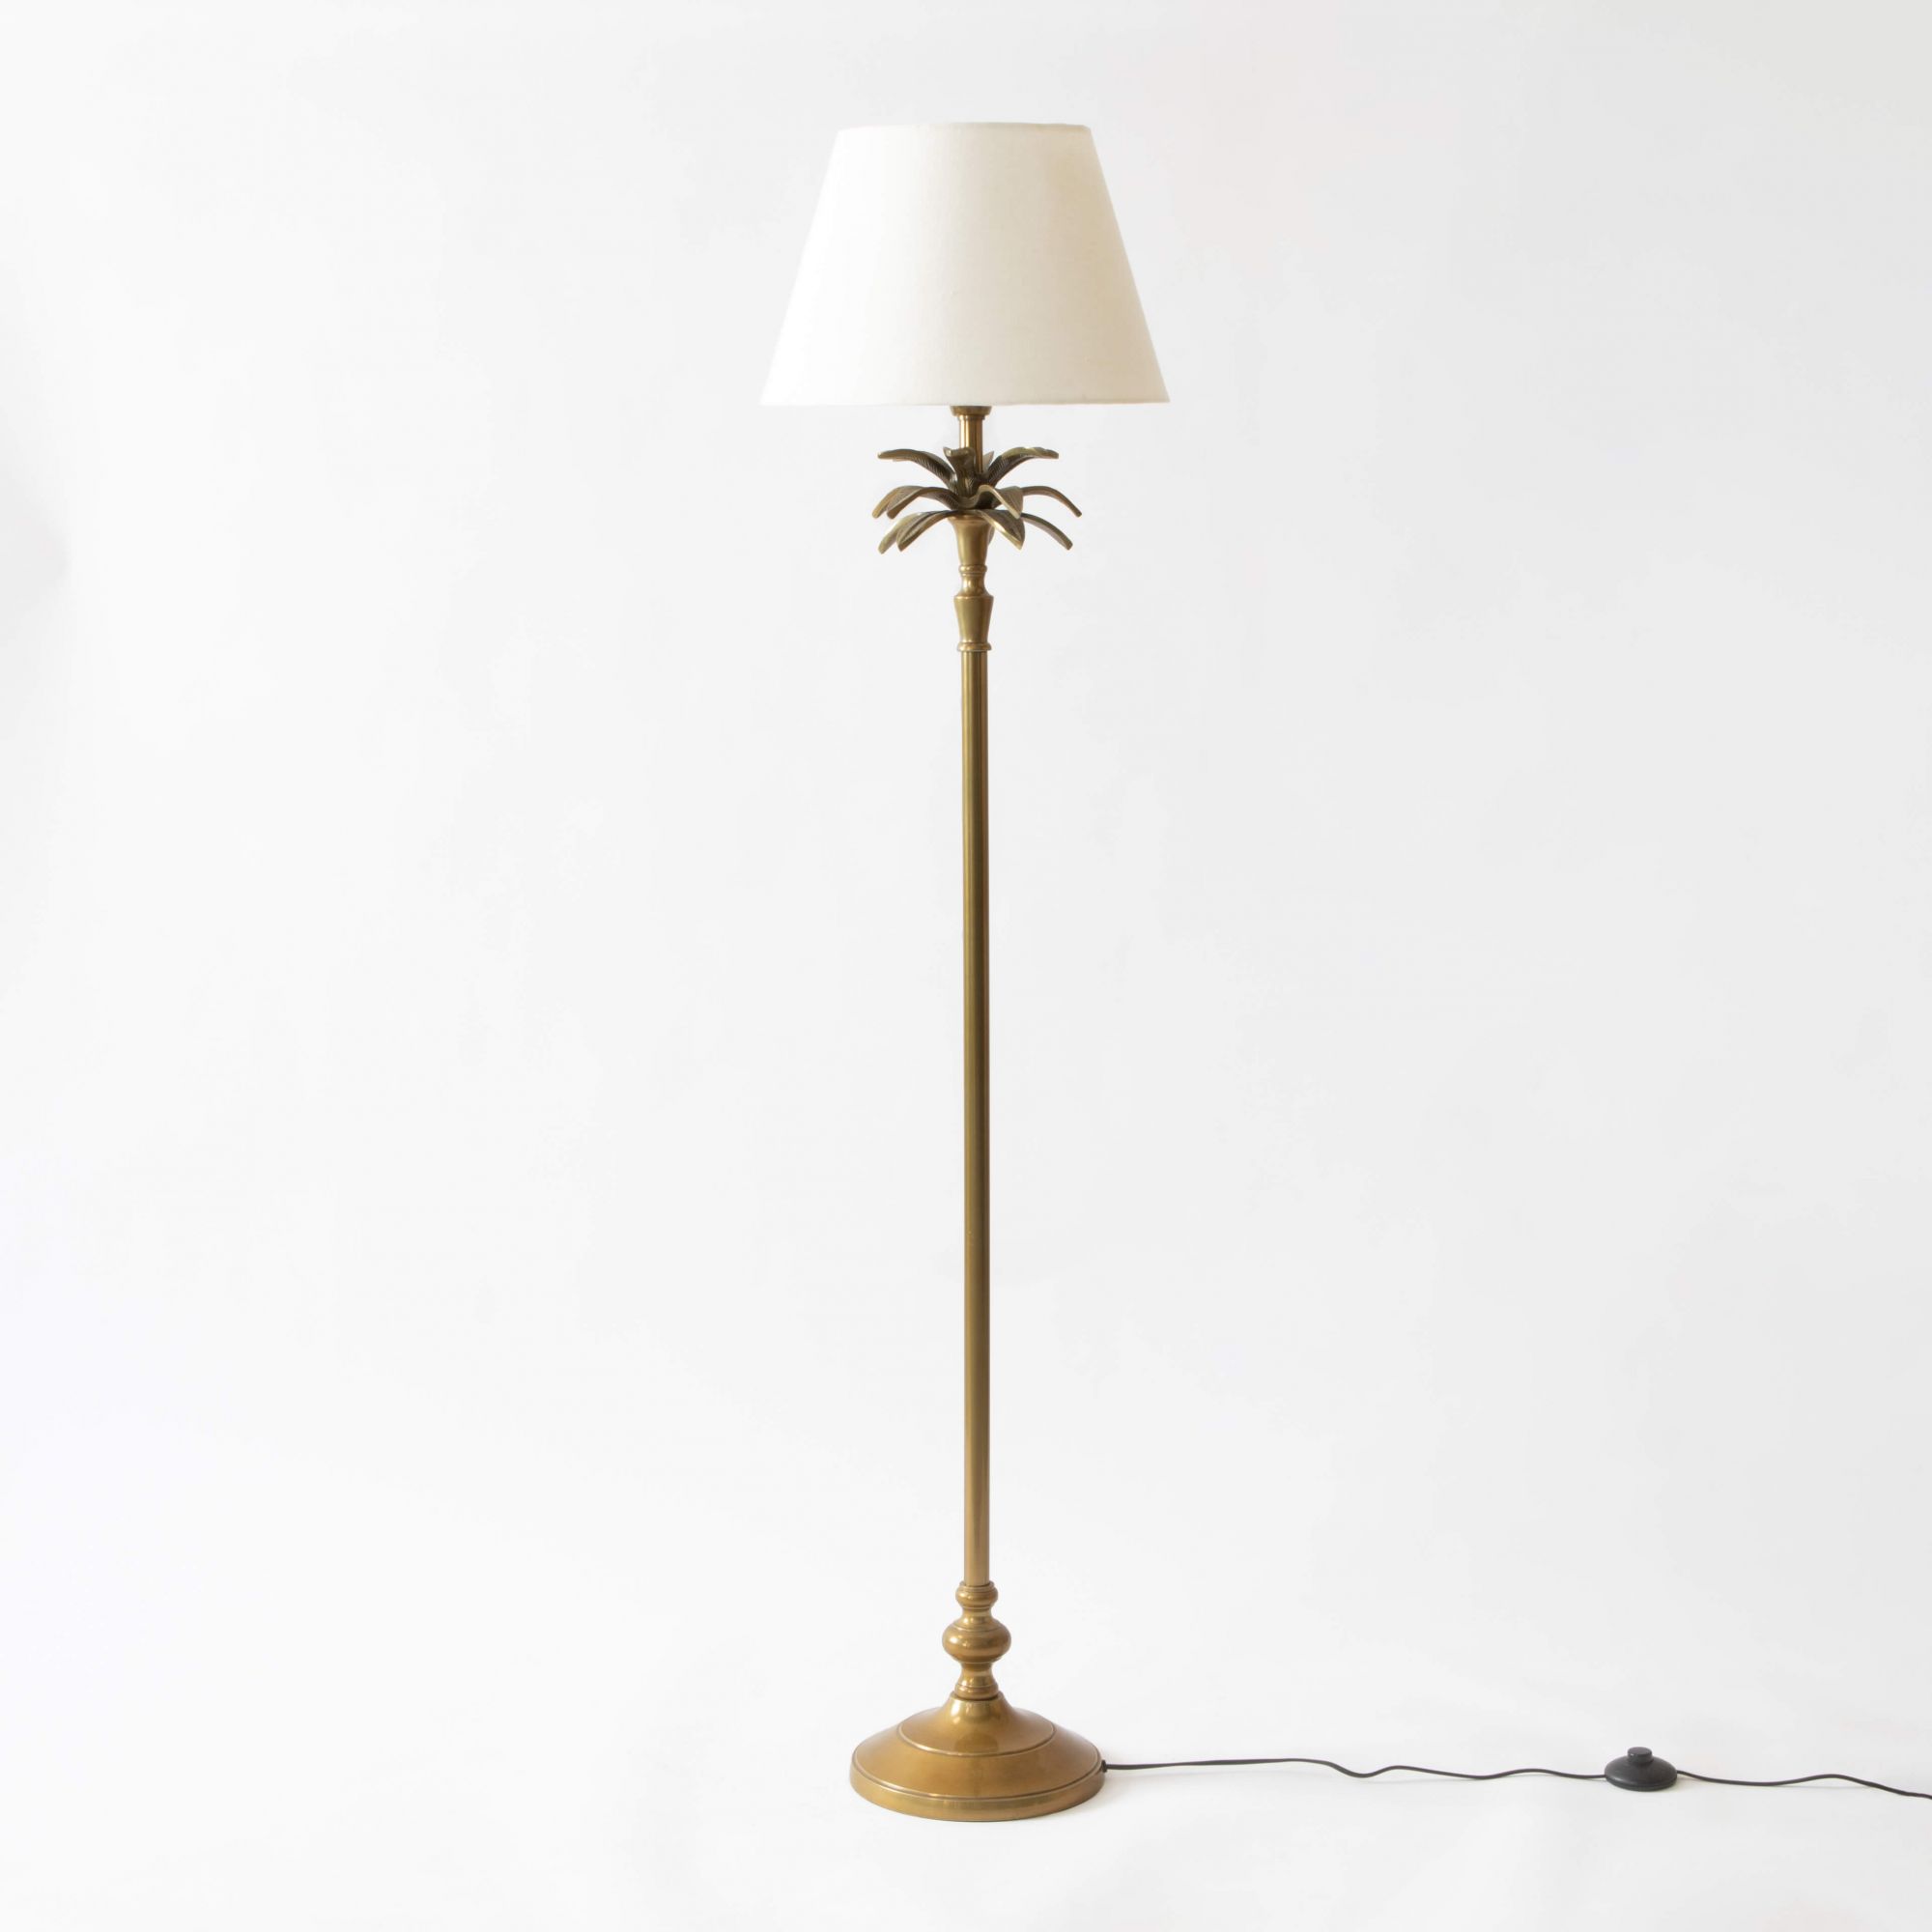 The Royal Palm Floor Lamp - Antique Brass